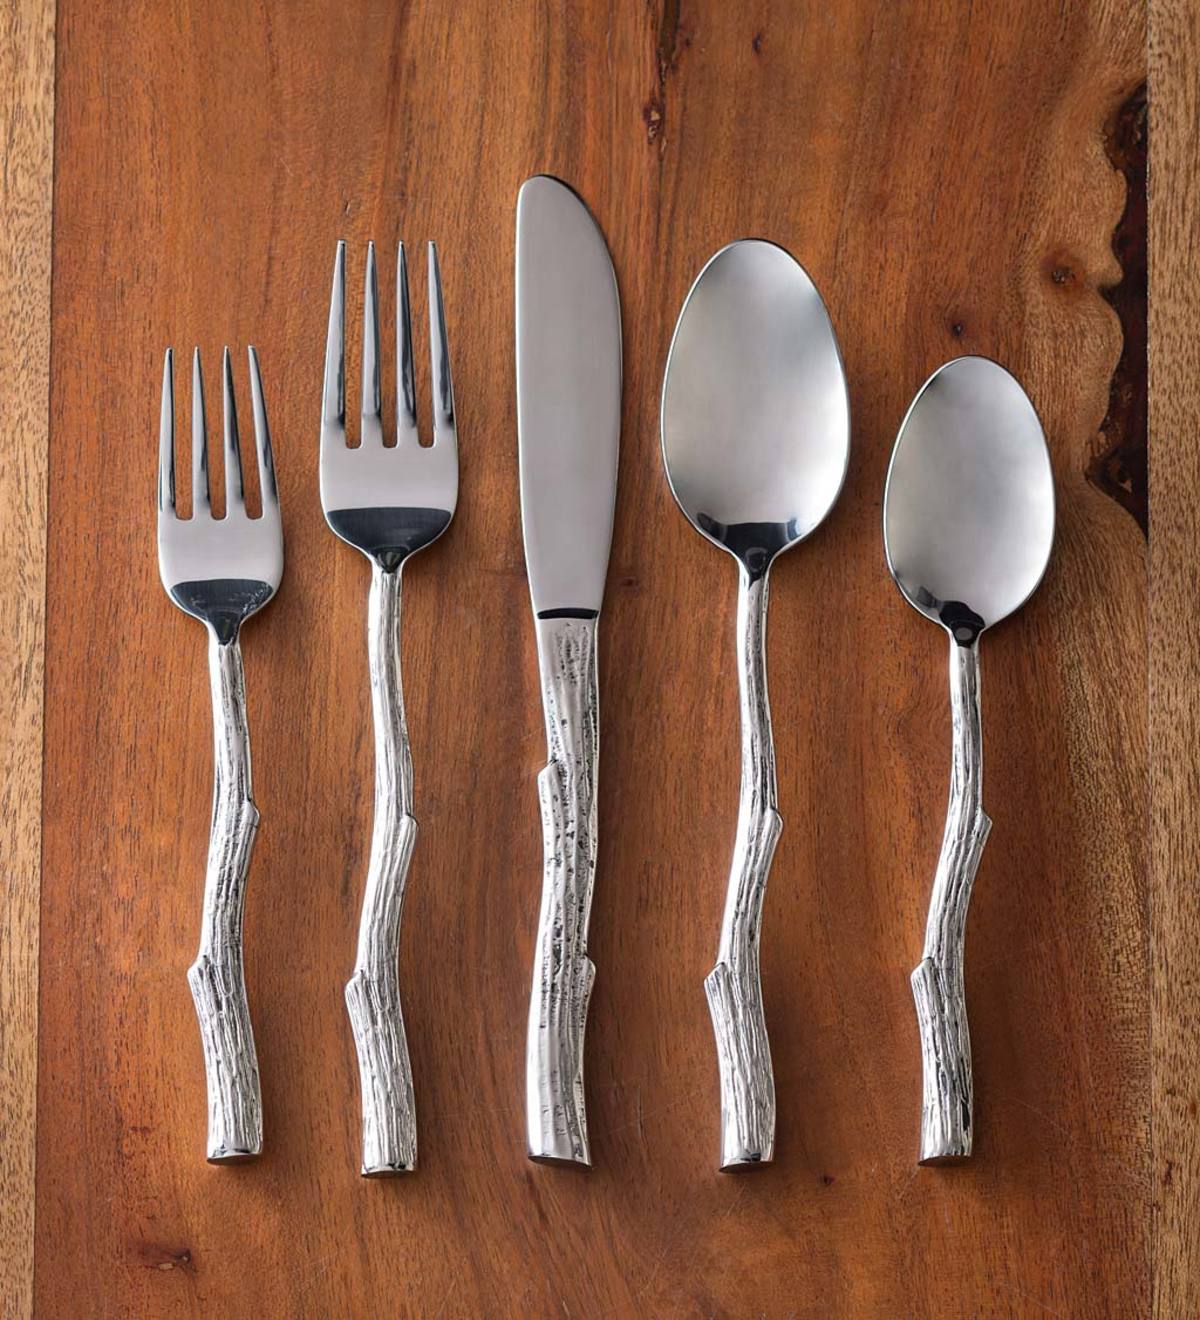 Trunk Branch Stainless Flatware